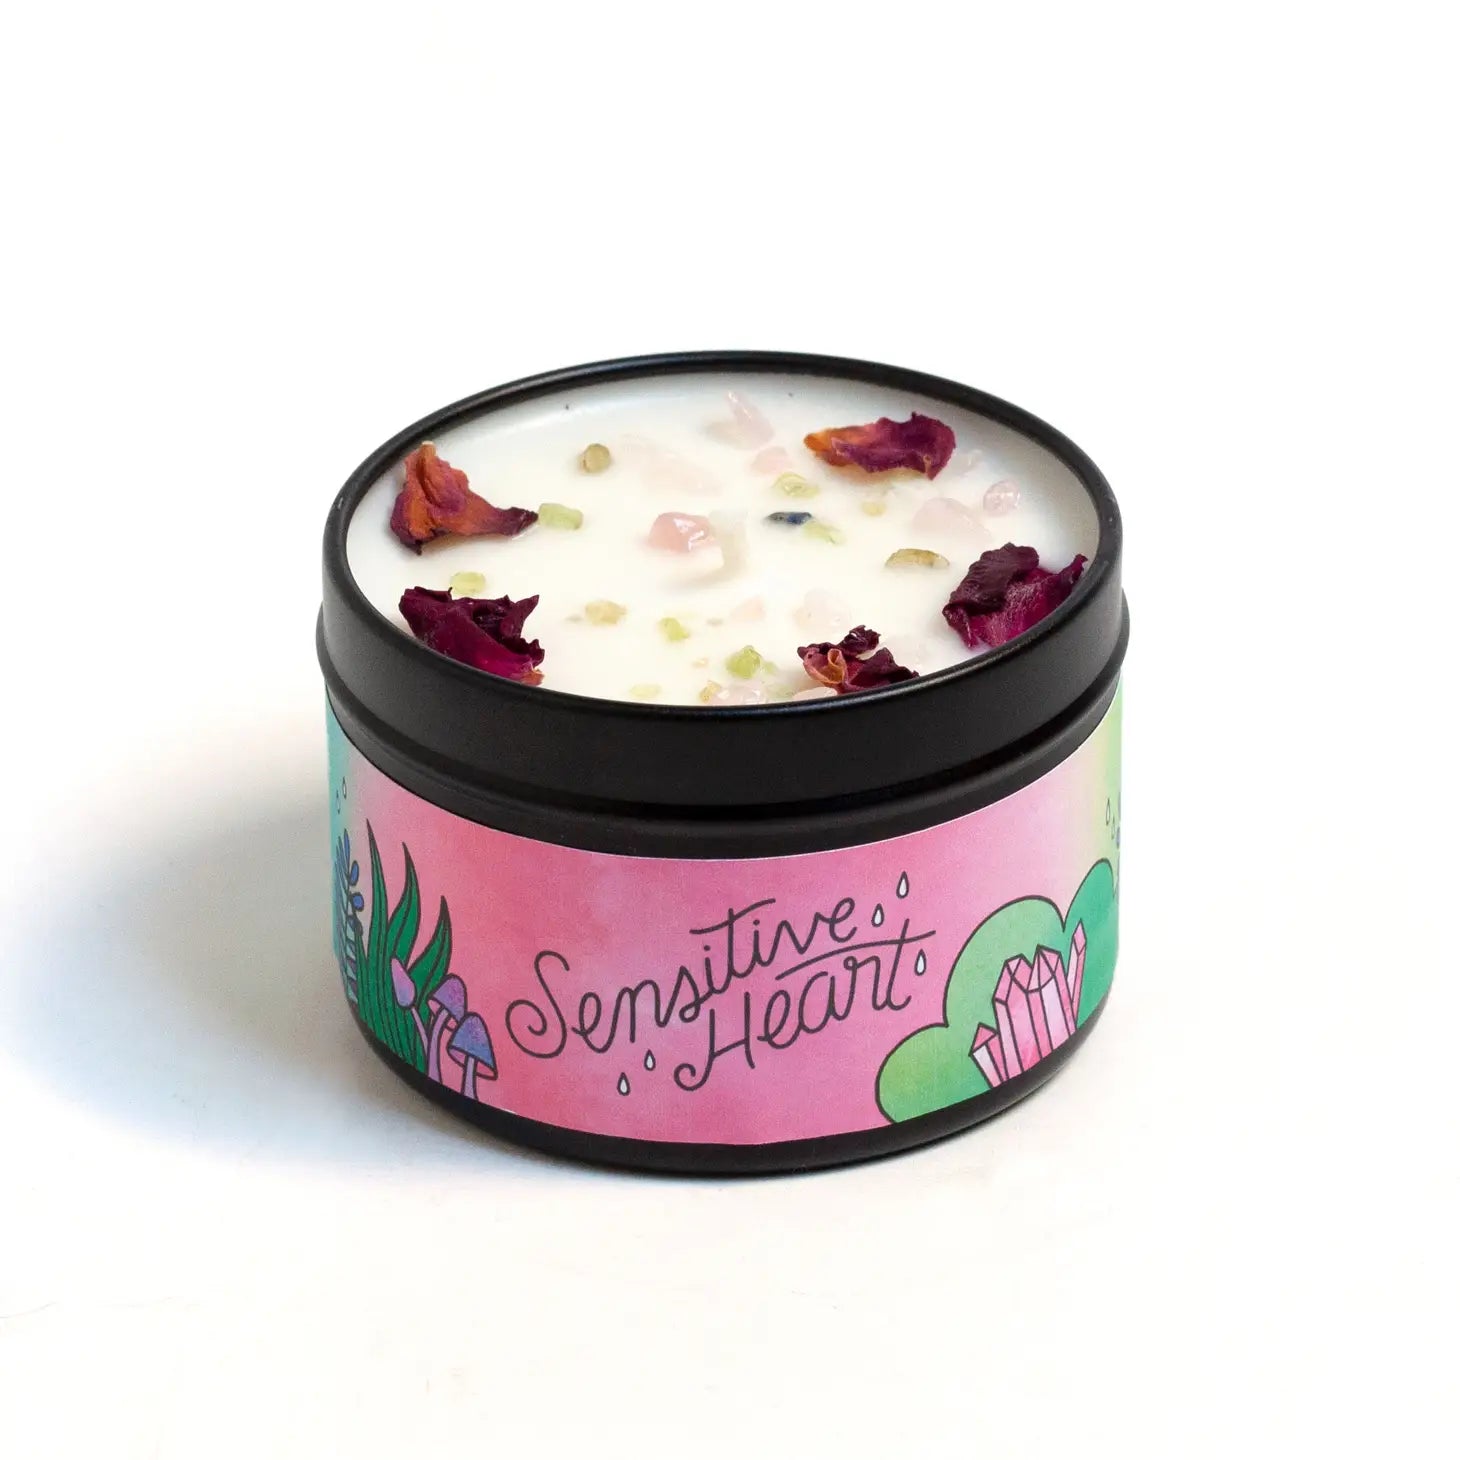 Sensitive Heart Floral & Citrus Candle Local PNW - Moon Room Shop and Wellness